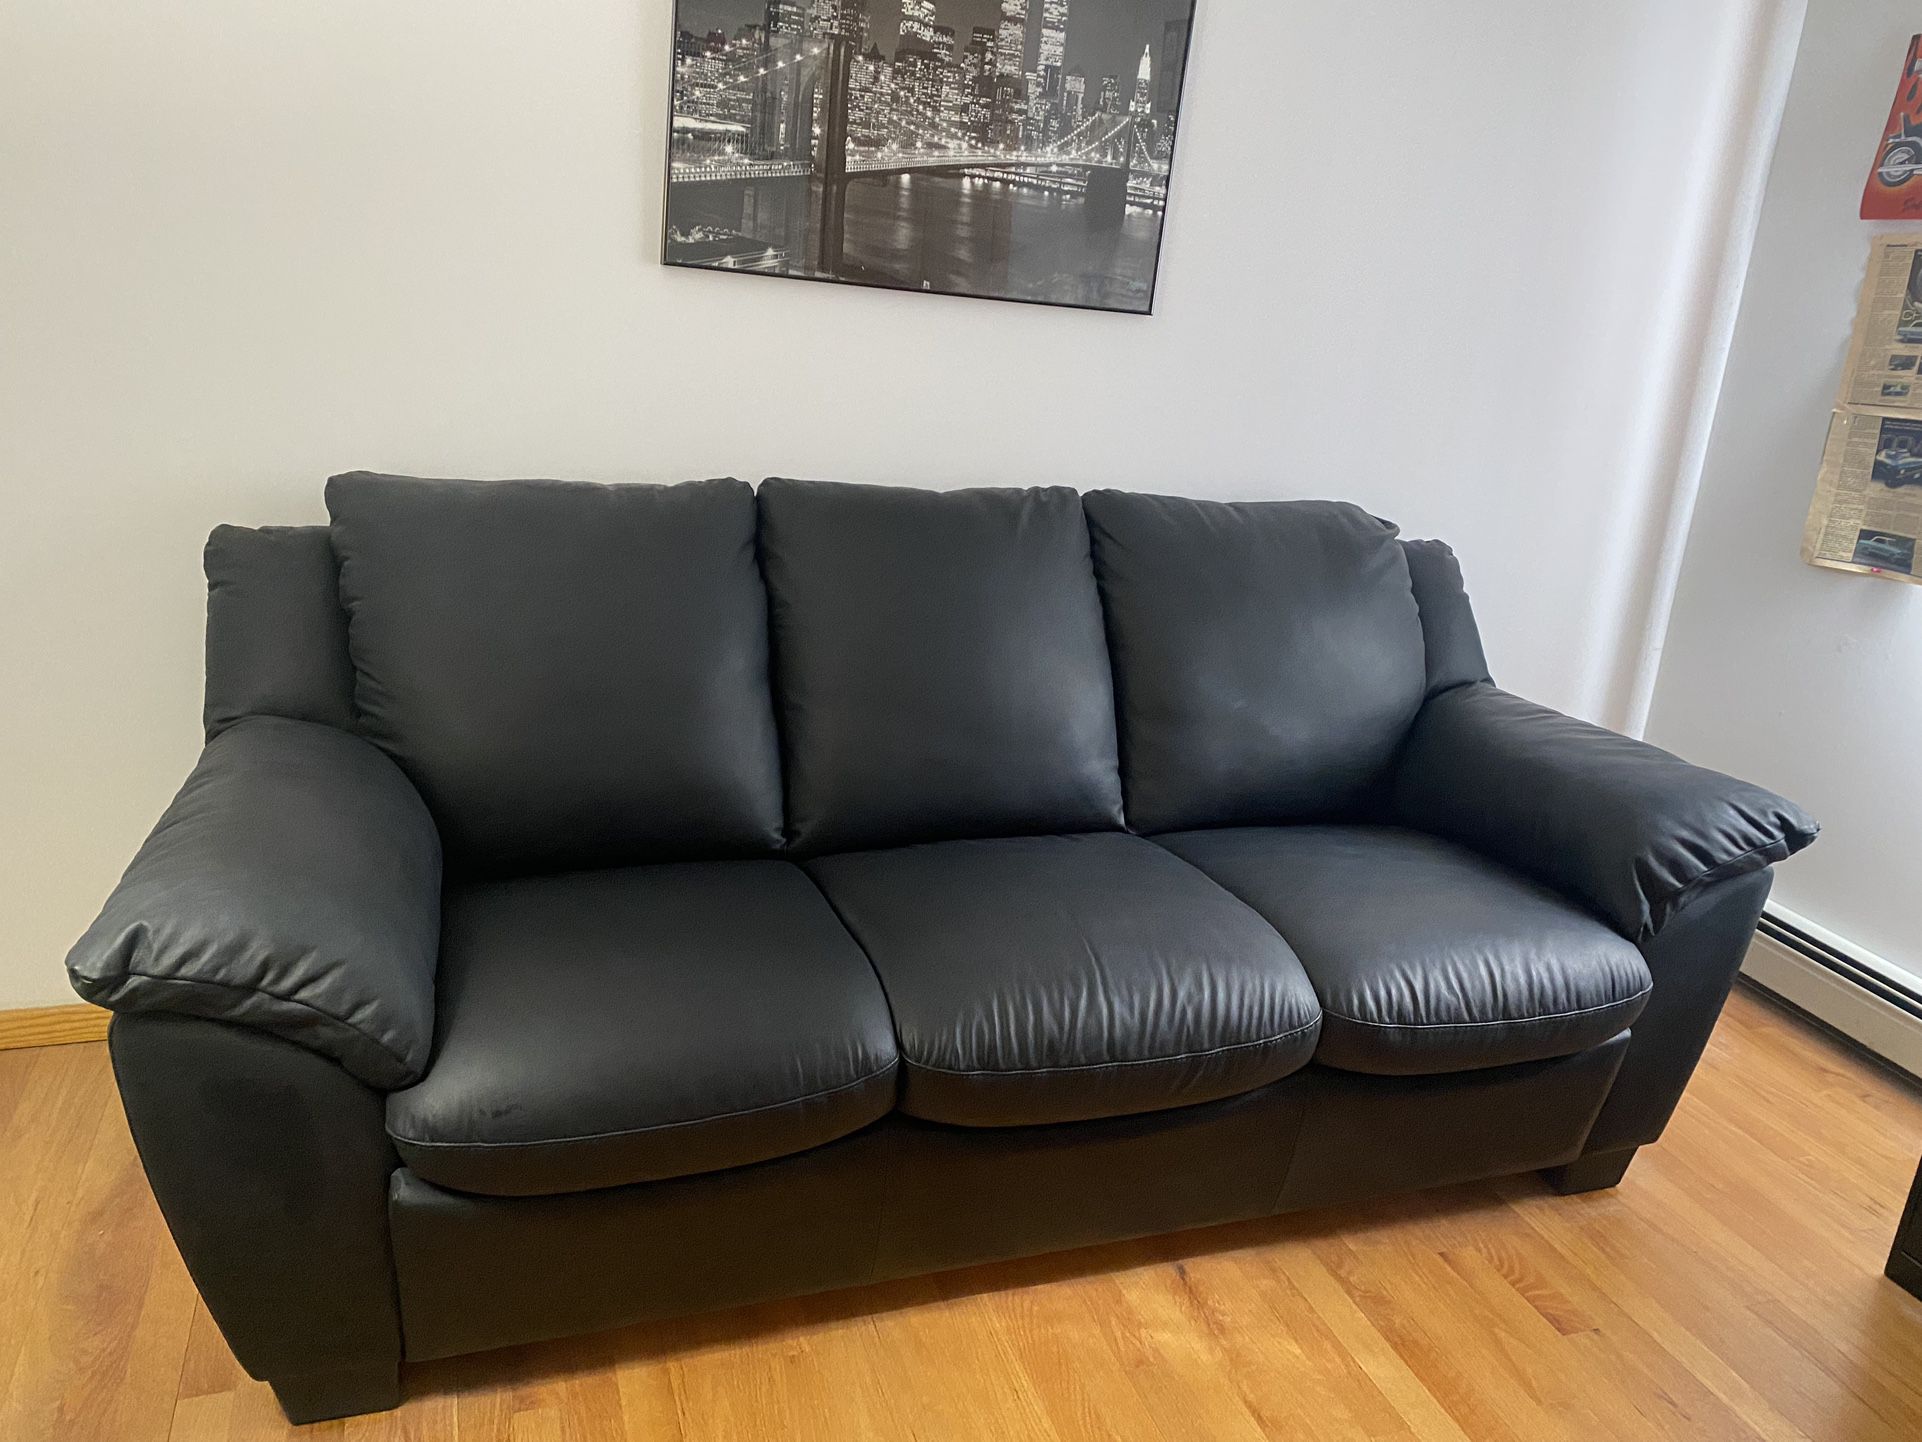 **LIKE NEW - LEATHER ITALSOFA BY NATUZZI - WITH PULL OUT SLEEPER